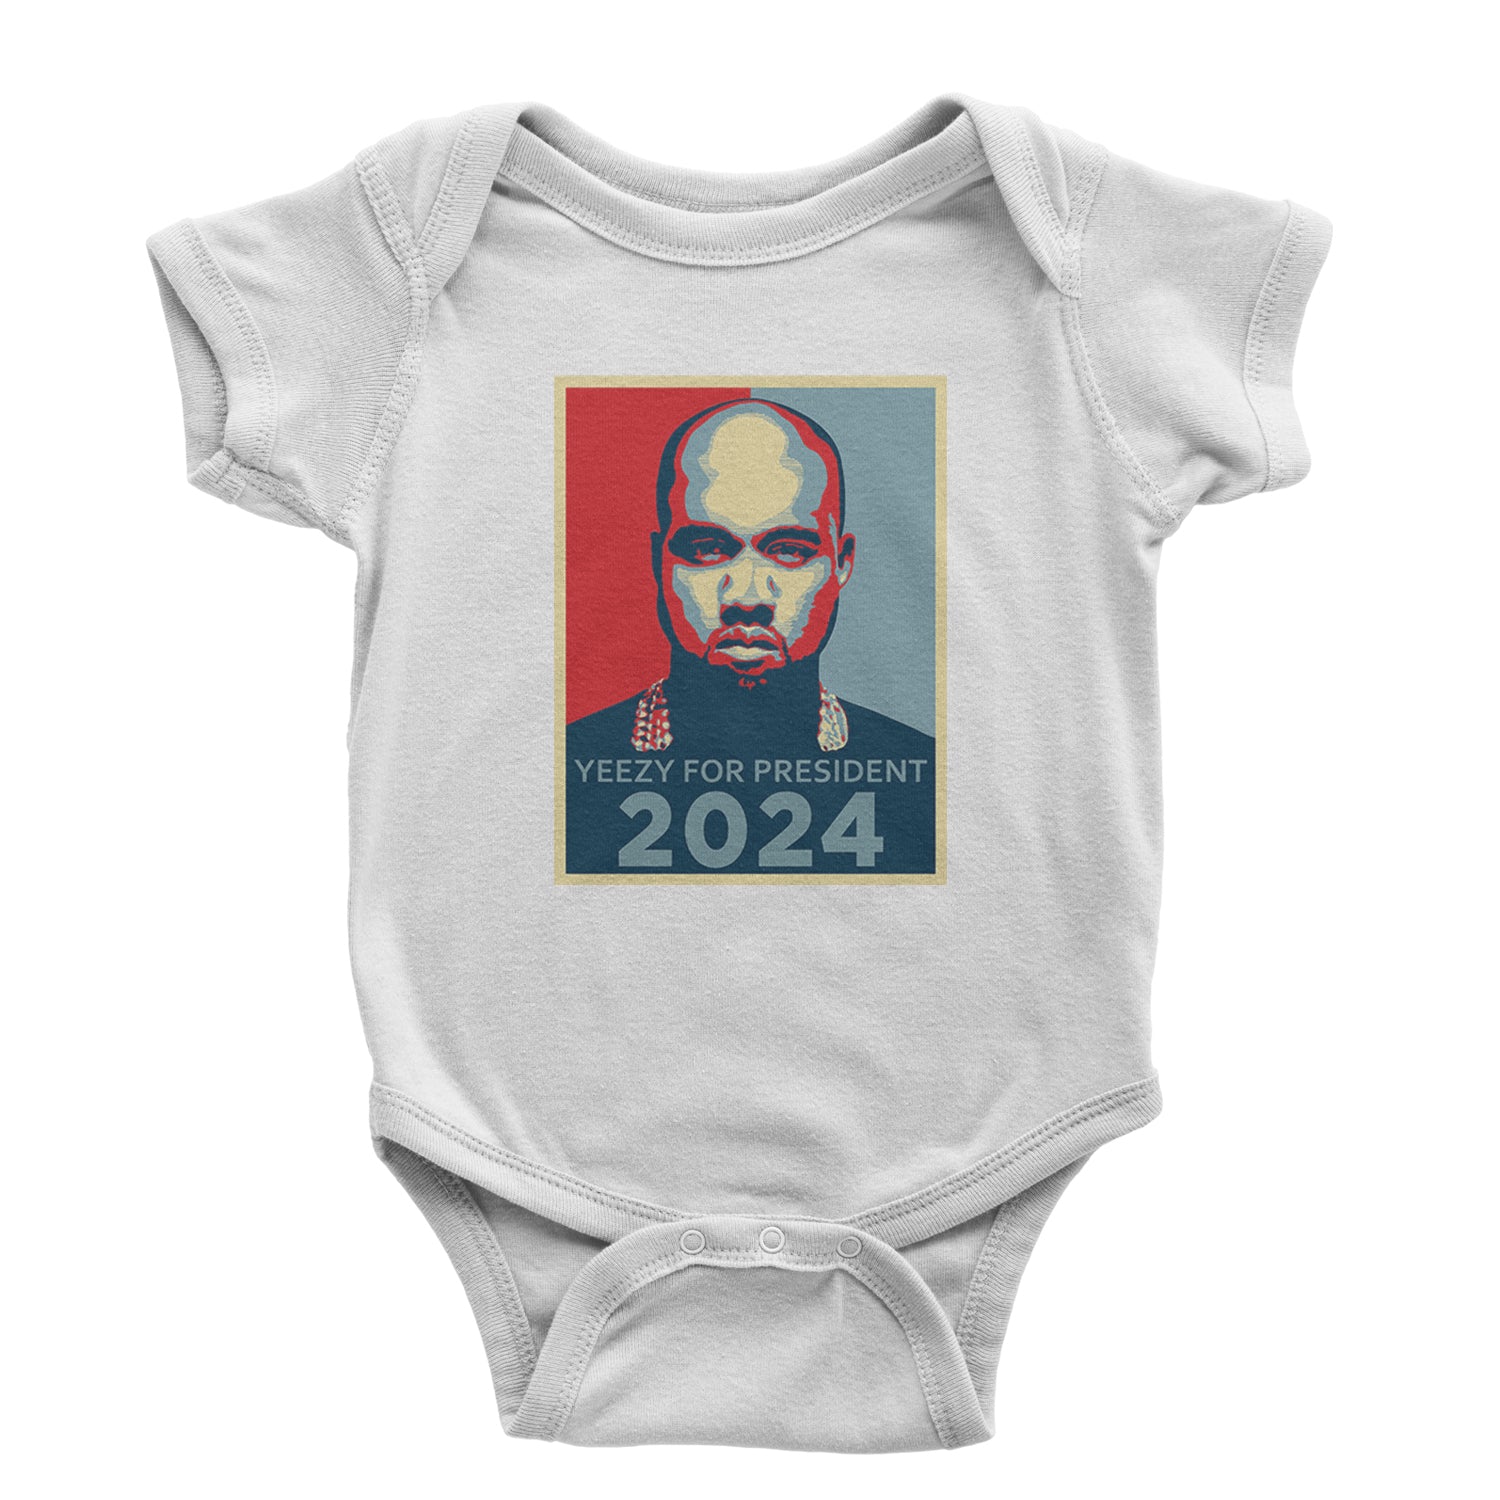 Yeezus For President Vote for Ye Infant One-Piece Romper Bodysuit and Toddler T-shirt Black